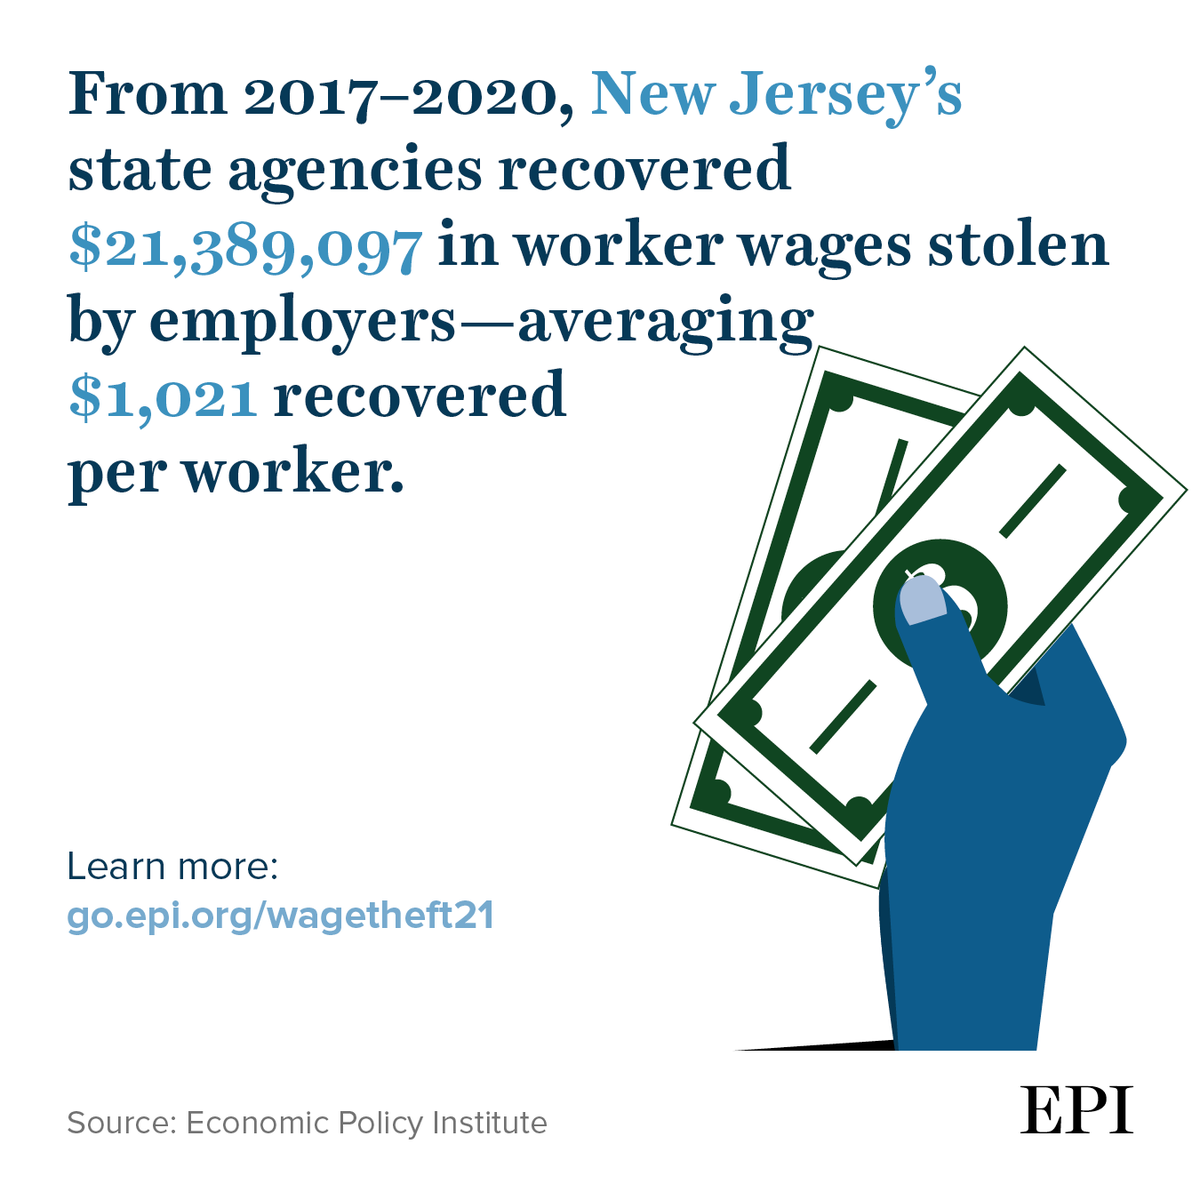 Let this sink in. $21.4M. And there is a lot more that is unreported. NJ needs stronger enforcement against employers who steal wages from their workers. Ideally, I love what MA has done with its public database of offenders.  #stopwagetheft